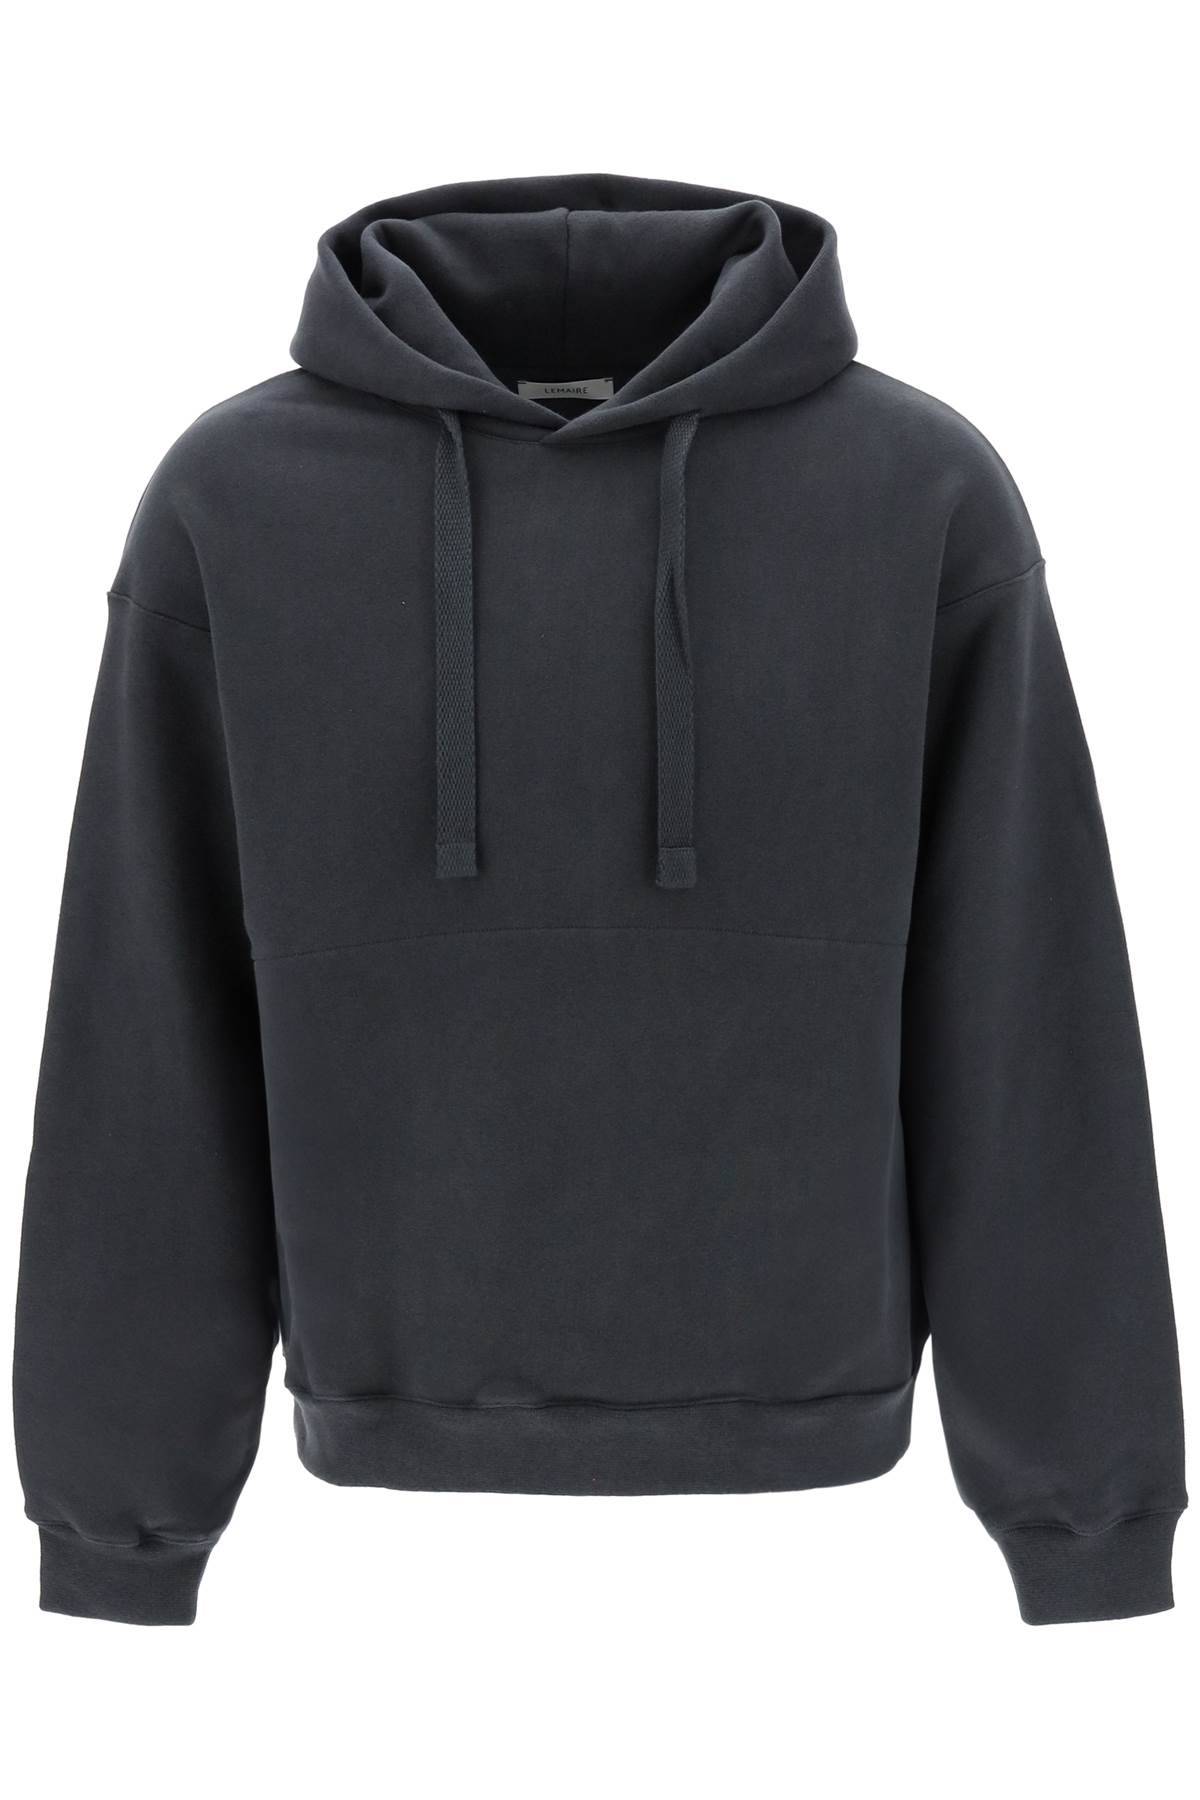 Lemaire LEMAIRE hoodie in fleece-back cotton